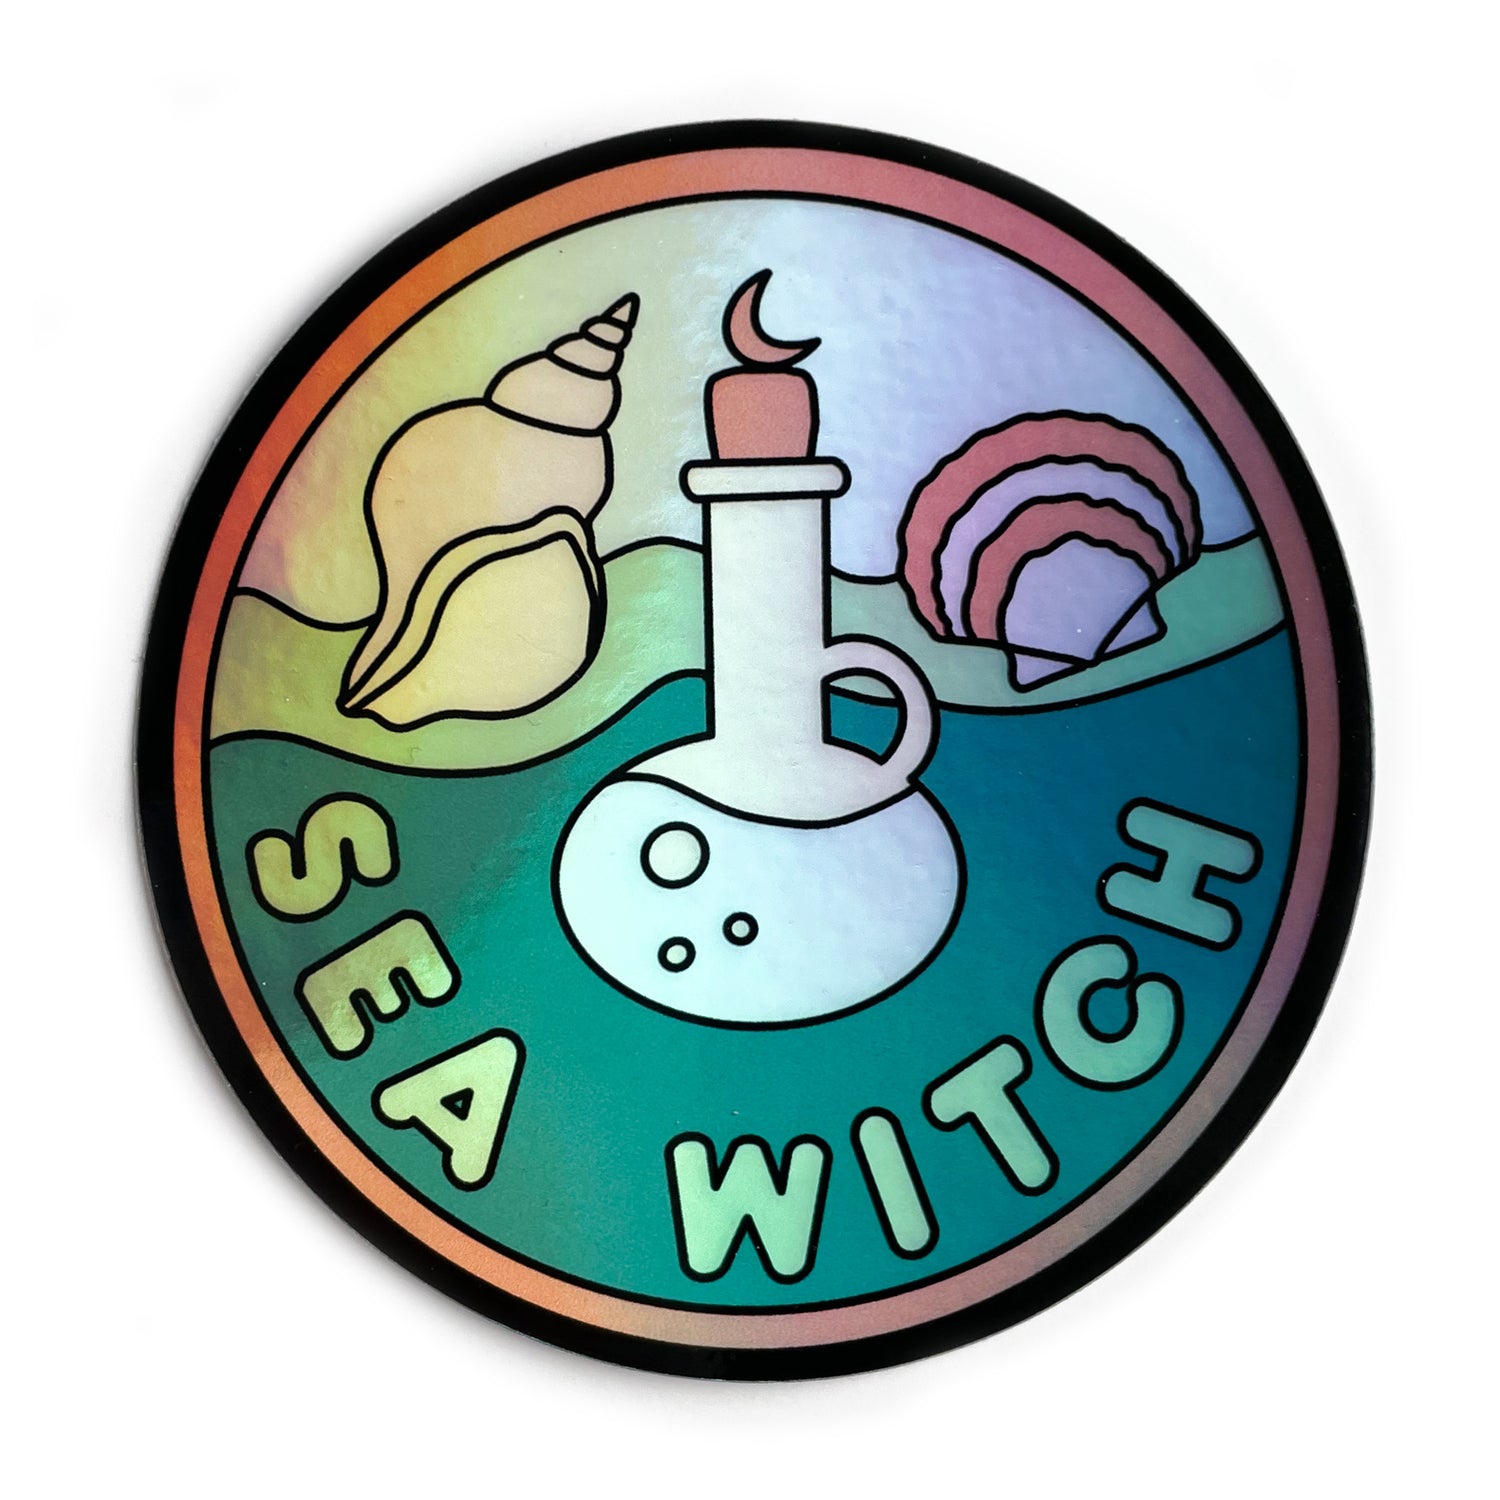 A circular holographic sticker with a salmon border the words "Sea Witch" on it. It has a potion bottle with sea shells and waves in the background.